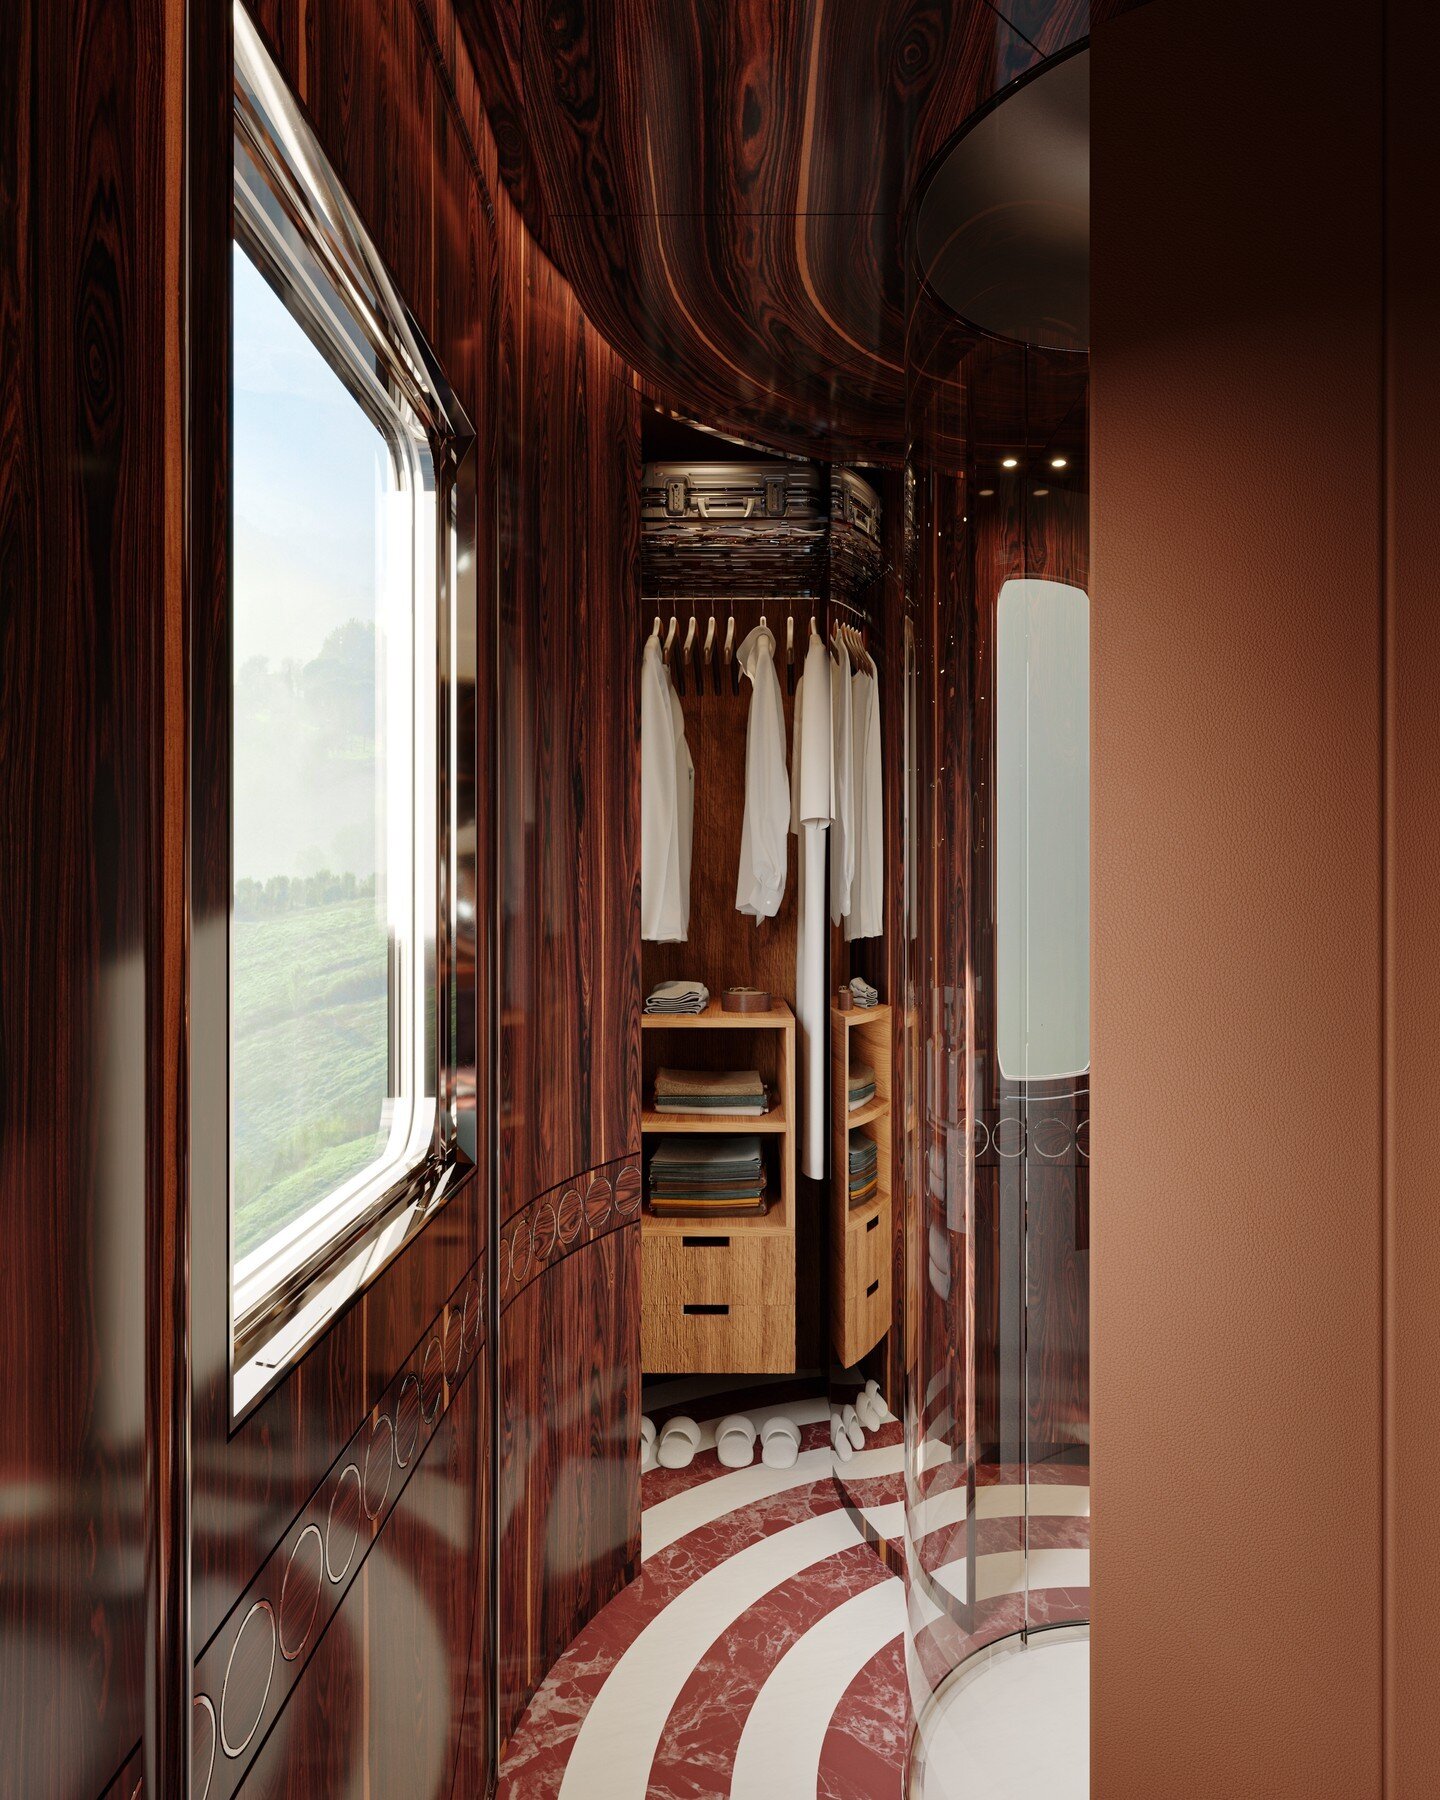 Behind the curved wood panels, a secret door reveals the suite&rsquo;s dressing room
Designed by @maximedangeac

#train #orientexpress #3d #dressingroom #suite #travel #luxury #curve #woodinterior